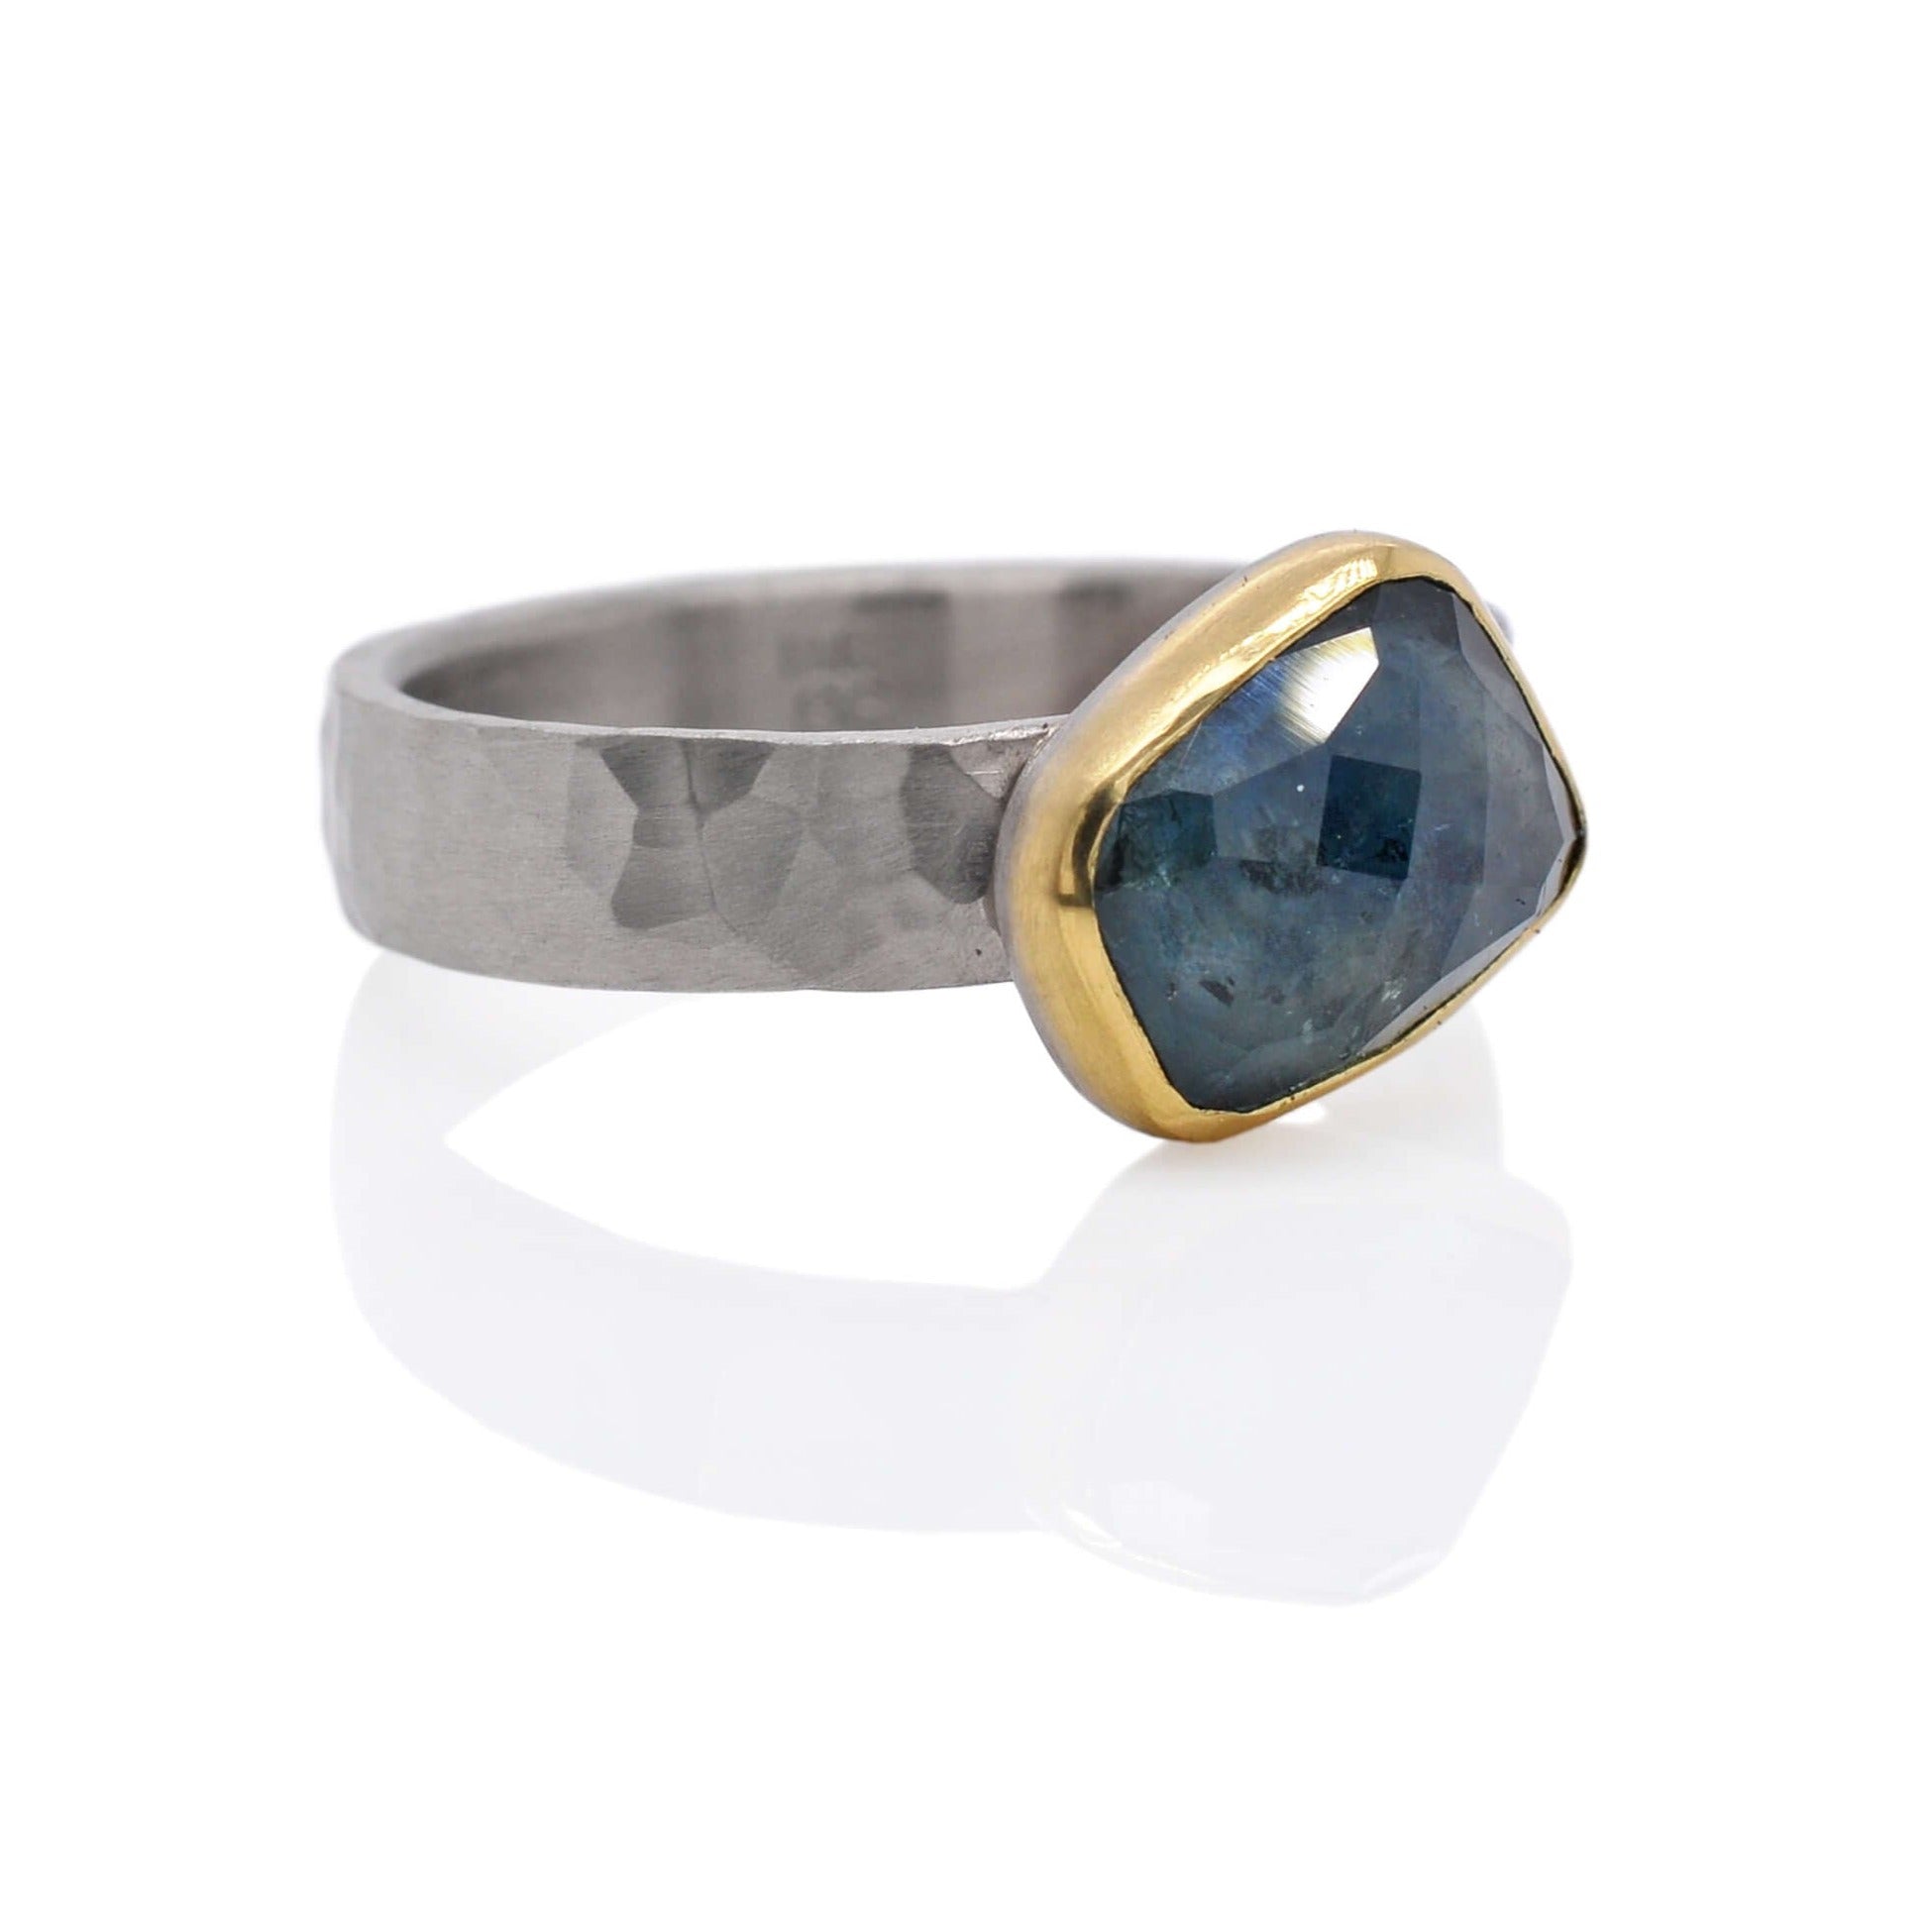 Blue sapphire ring bezel set with yellow gold on a hammered band of palladium. Handmade by EC Design Jewelry in Minneapolis, MN.